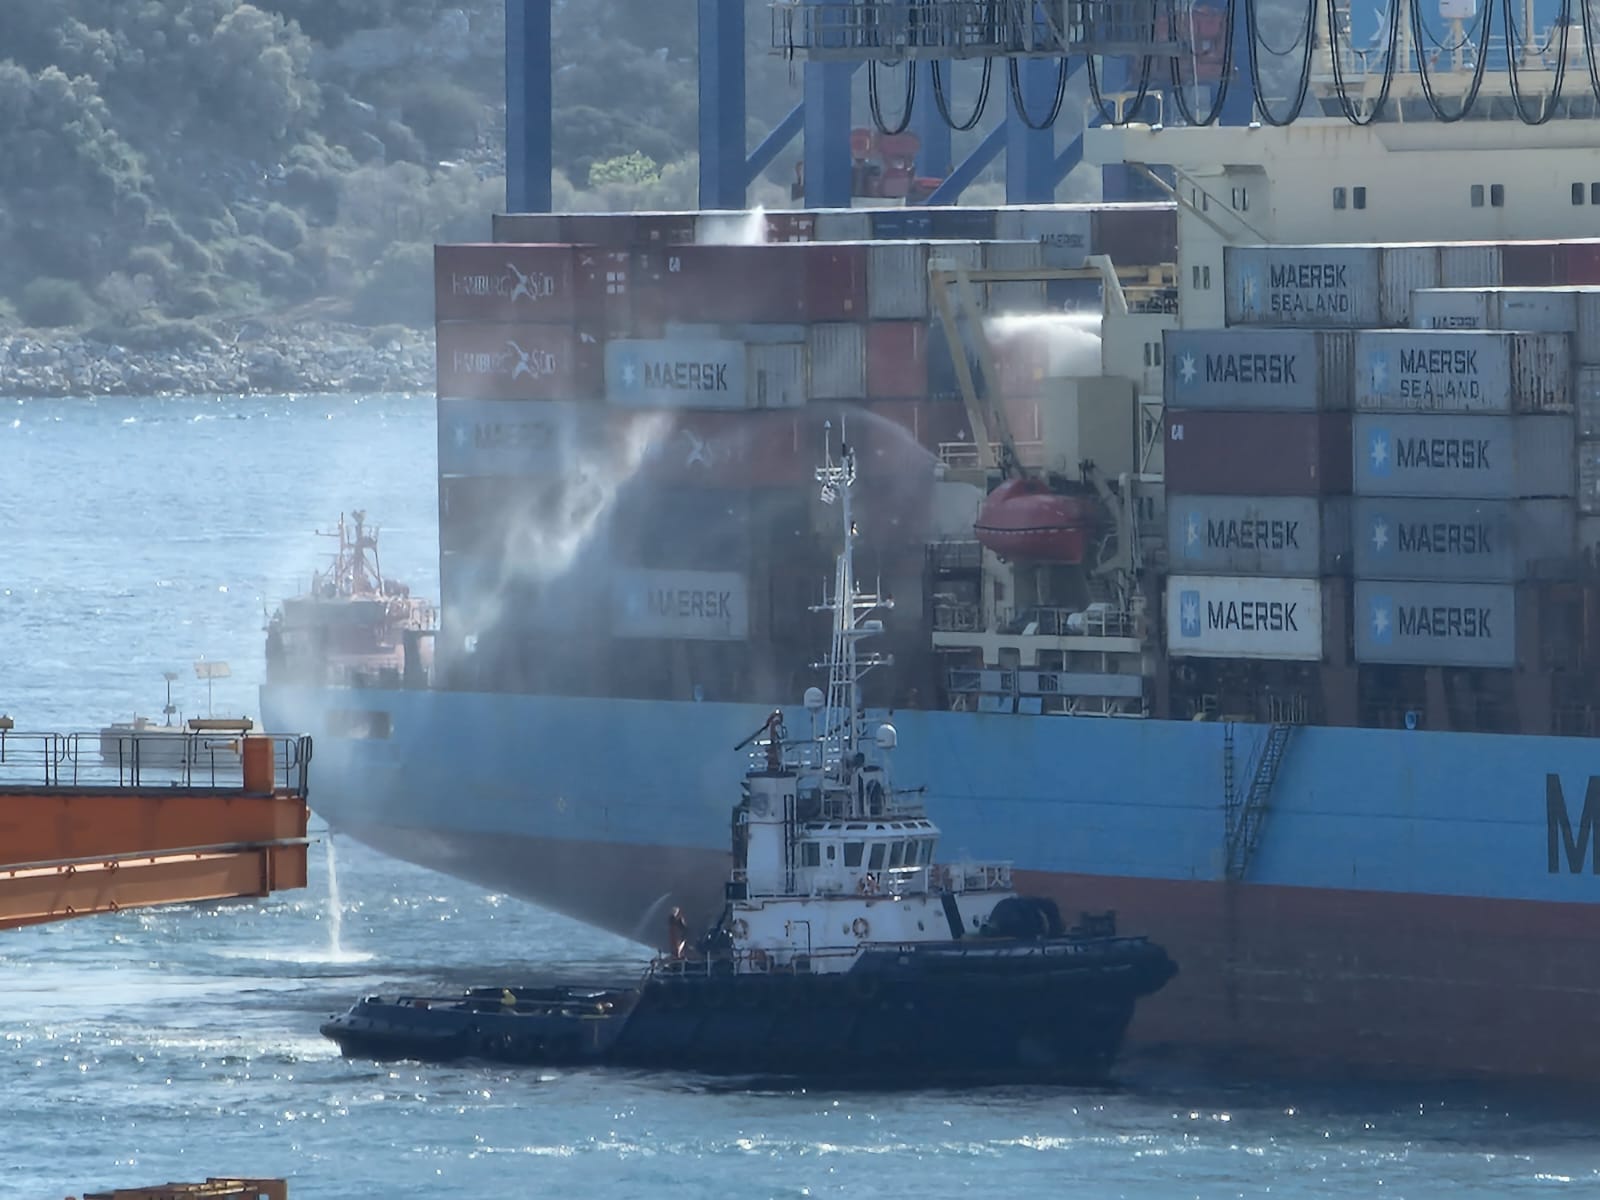 Tugs spray water on a container on board the Luna Maersk.